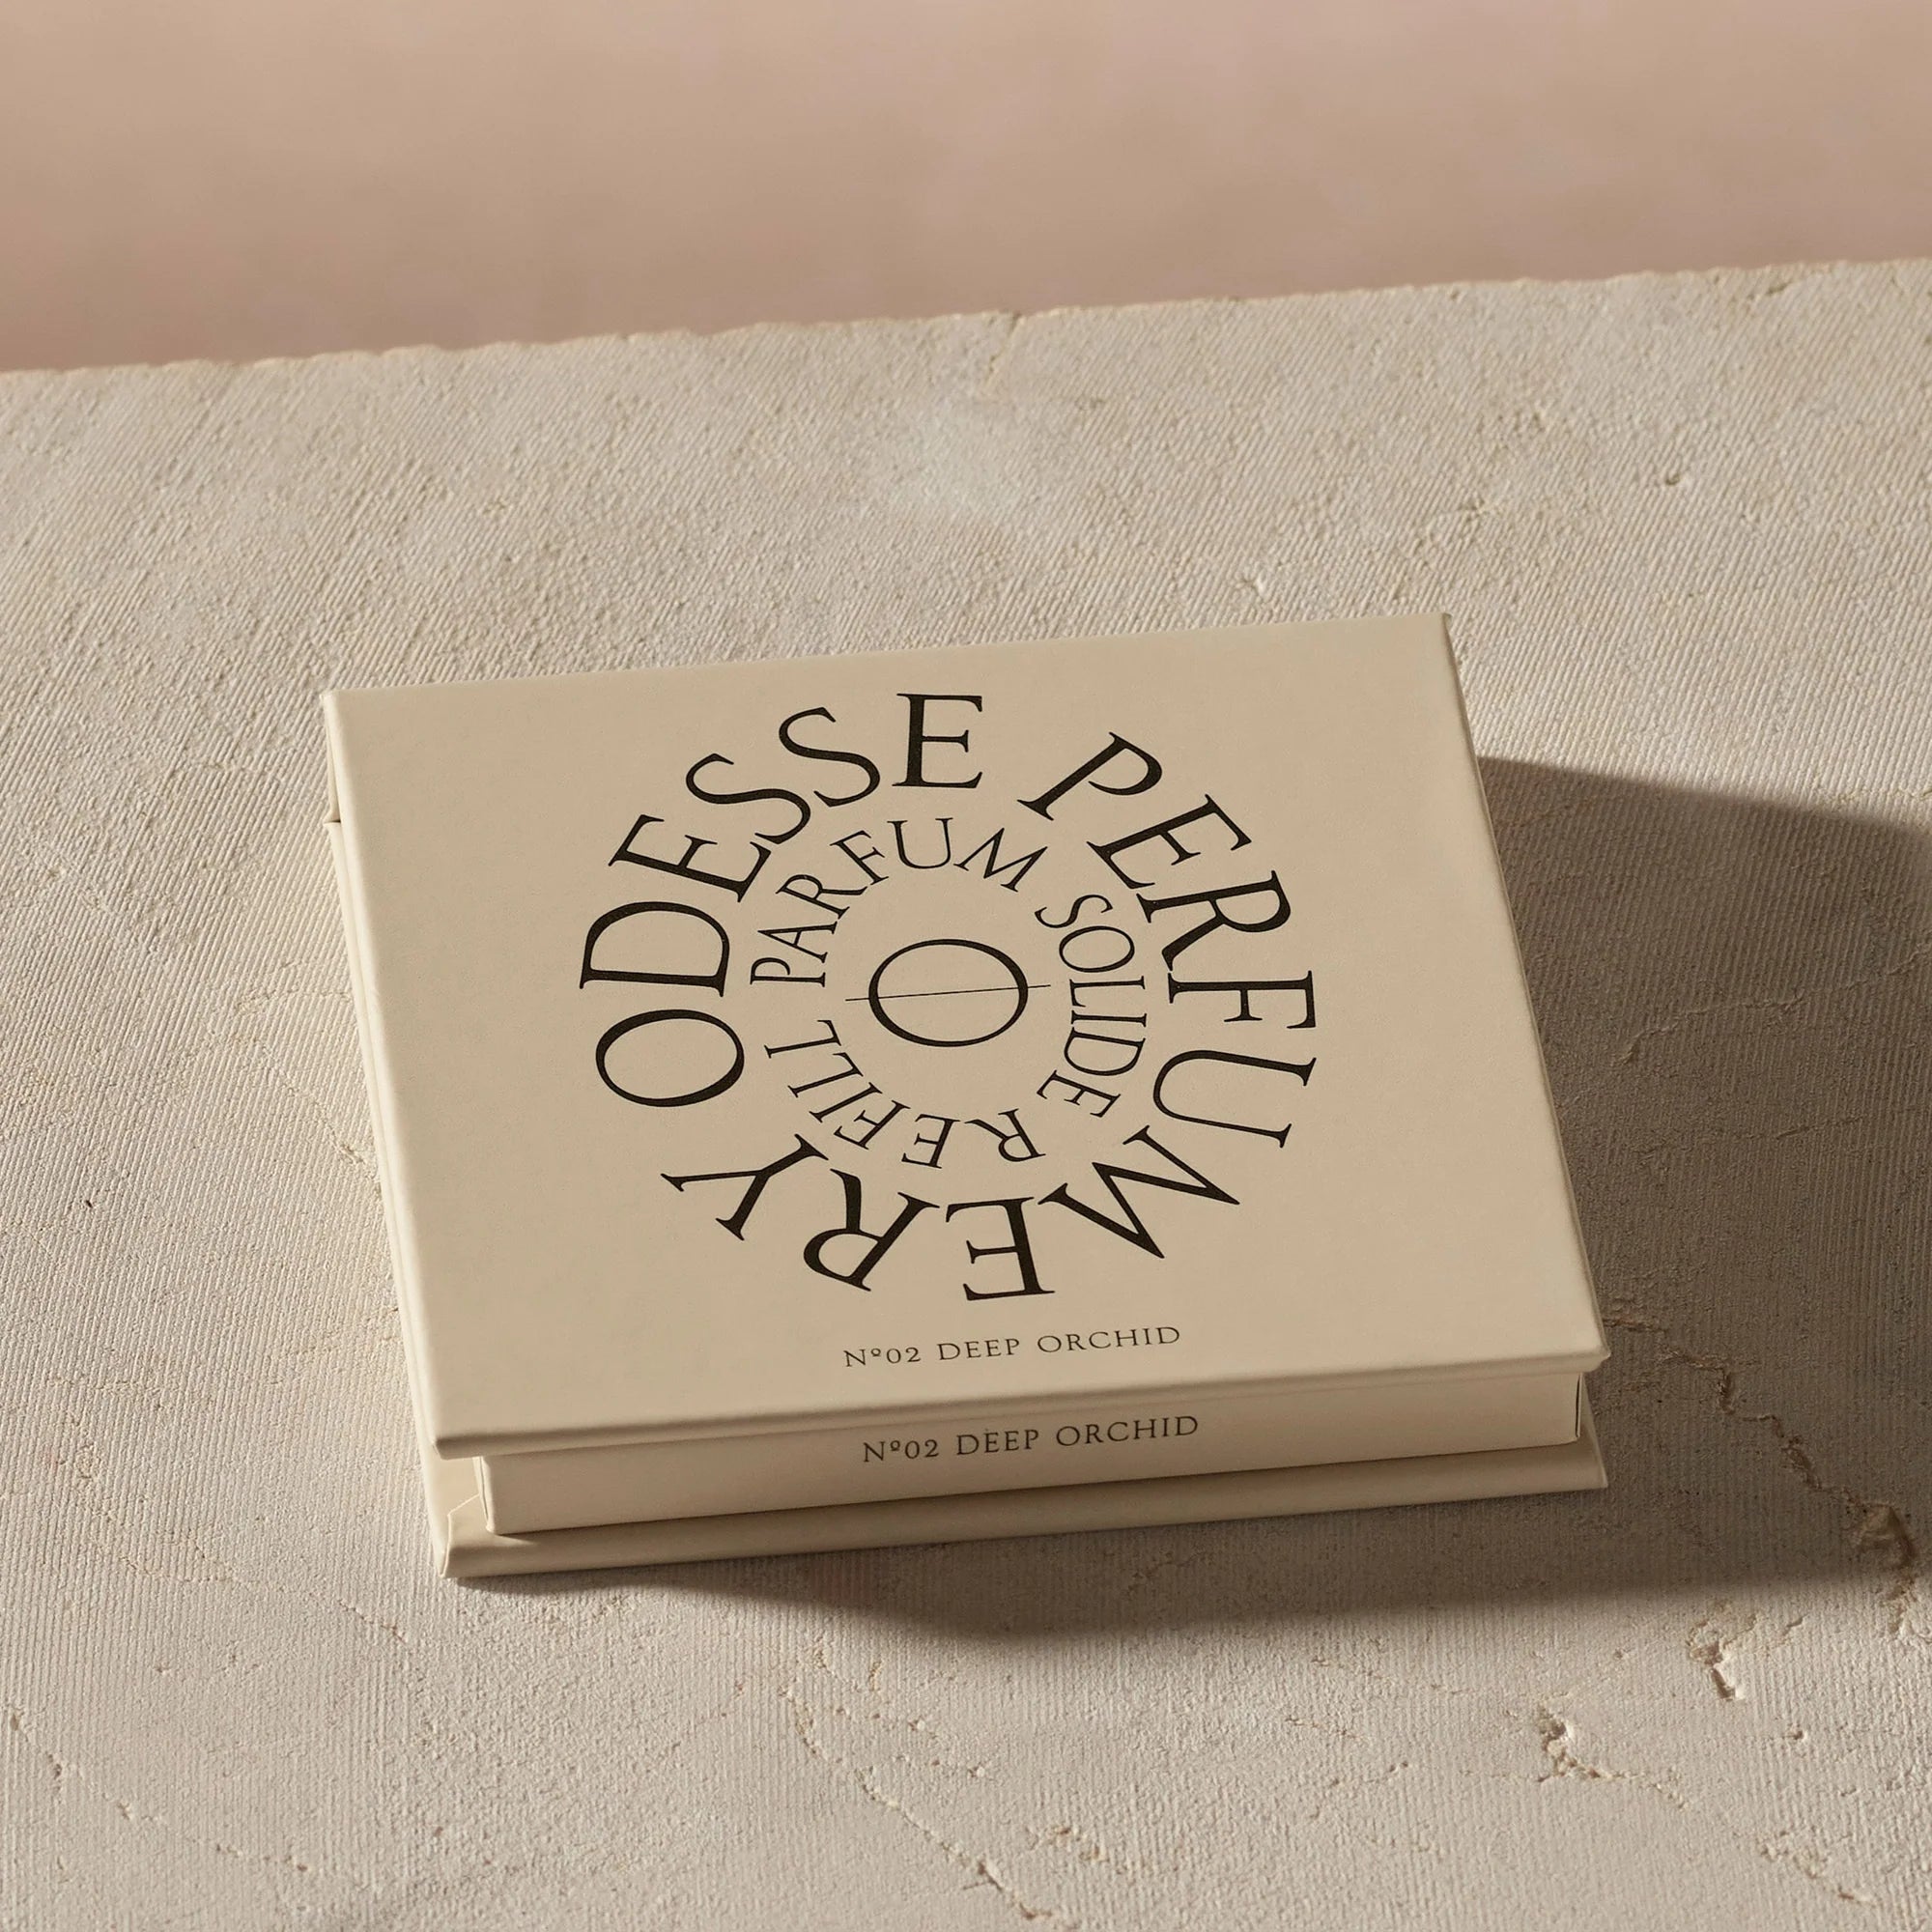 Odesse Solid Perfume - No. 02 Deep Orchid